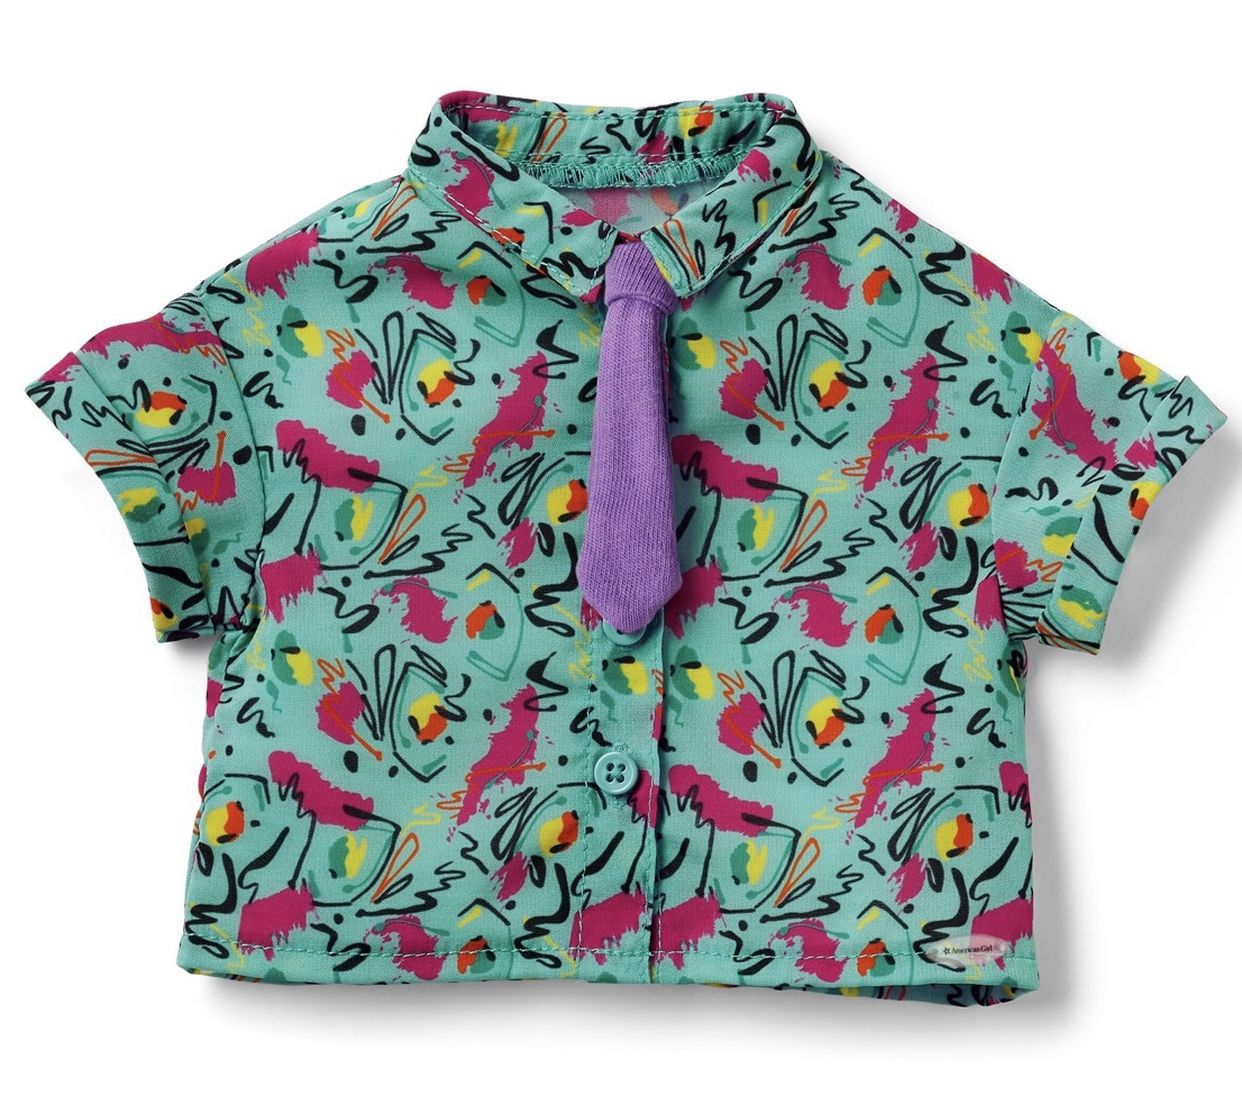 American Girl Courtney Shirt & Tie for 18-inch Dolls